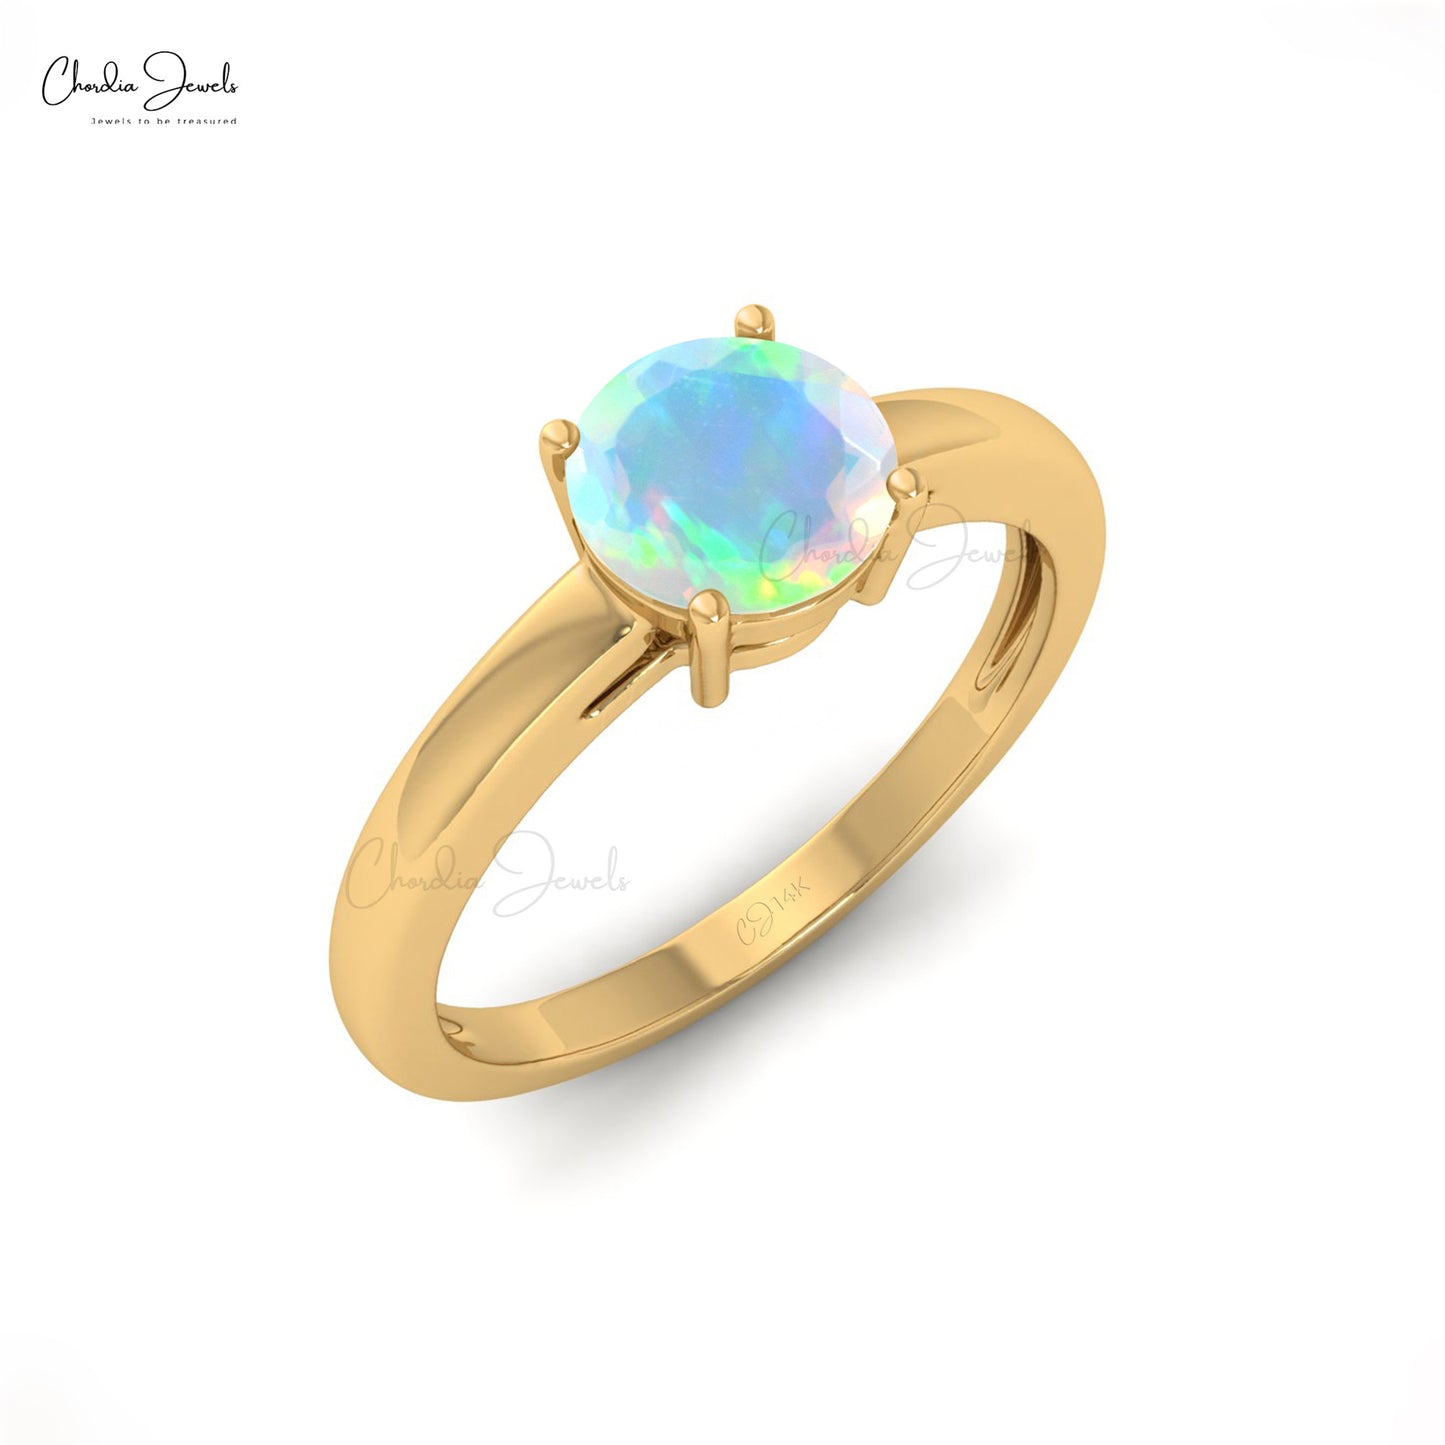 Natural 6mm Round Cut Ethiopian Opal Solitaire Ring For Her, 14k Solid Gold Sharing Prong Gemstone Ring For Gift